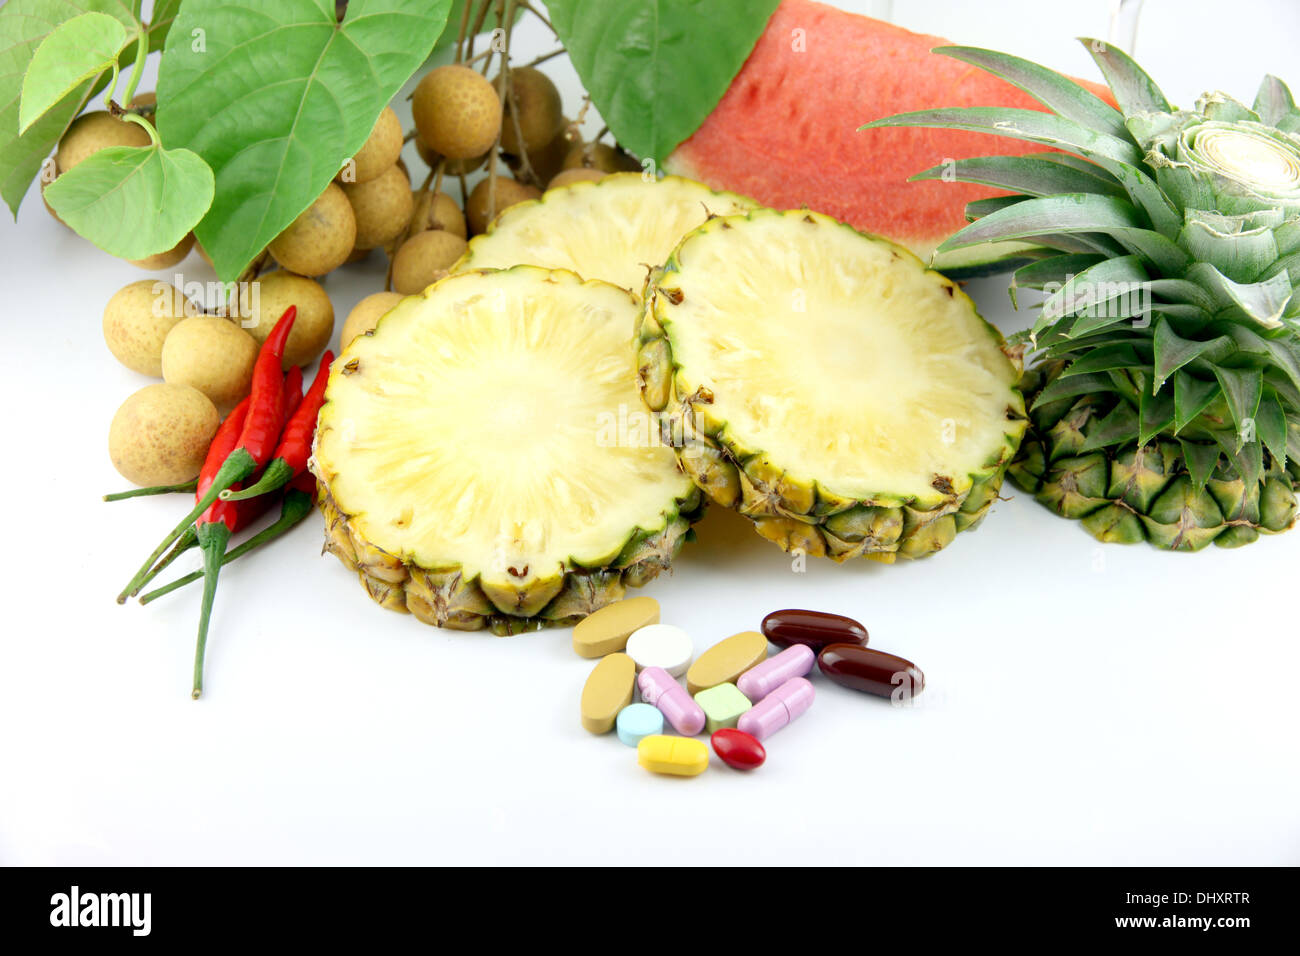 Fruits and medicines placed on white background. Stock Photo